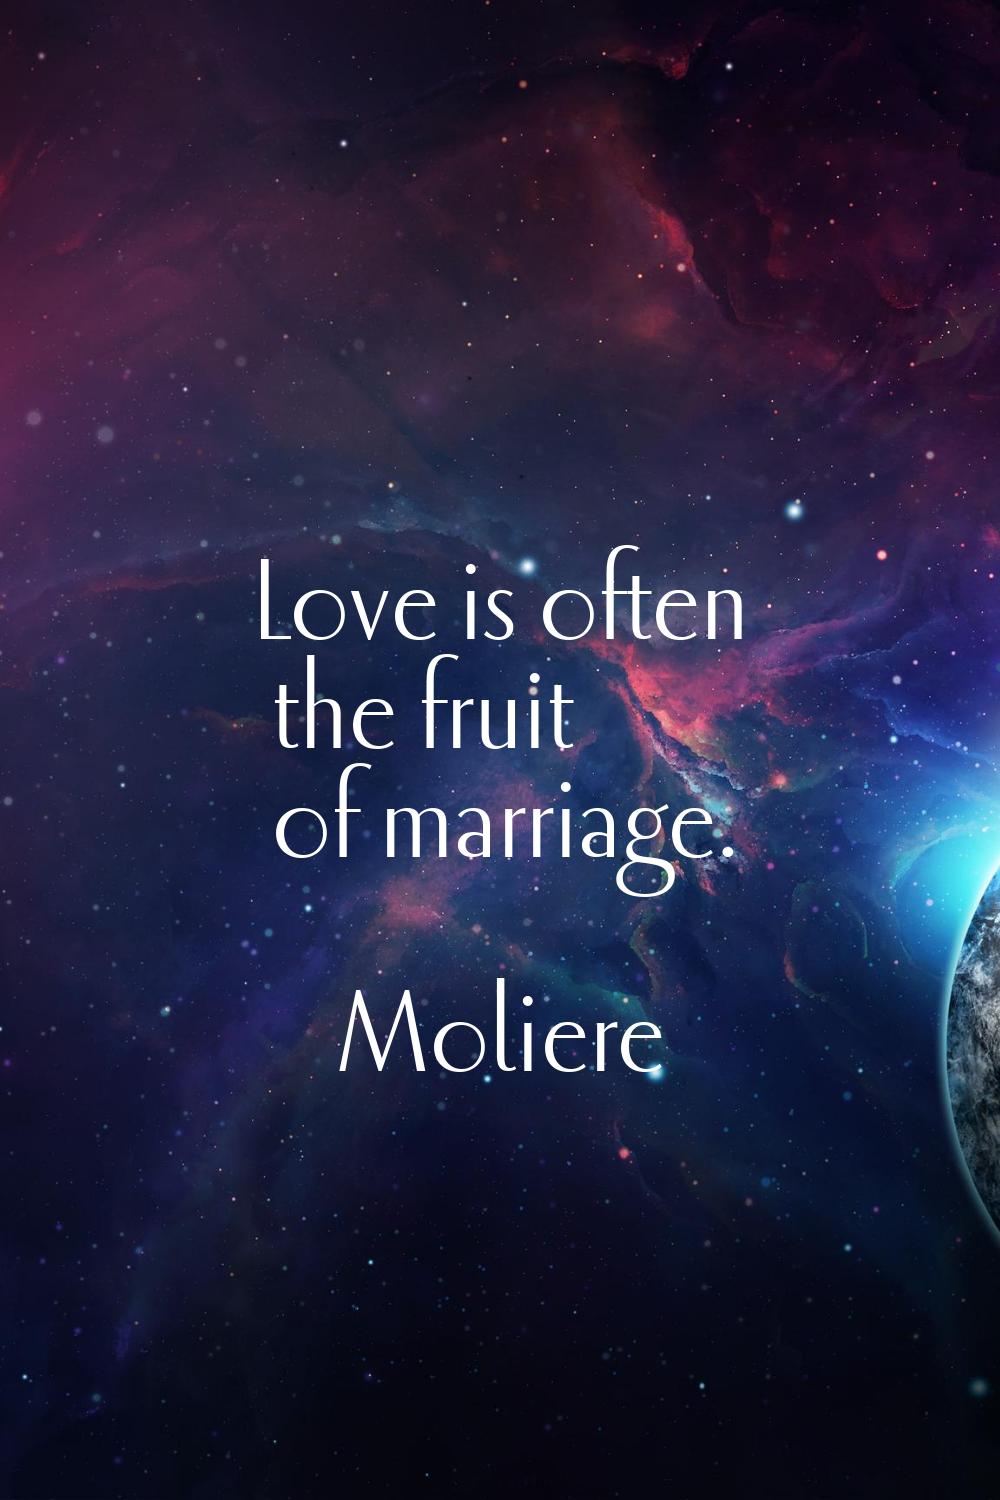 Love is often the fruit of marriage.